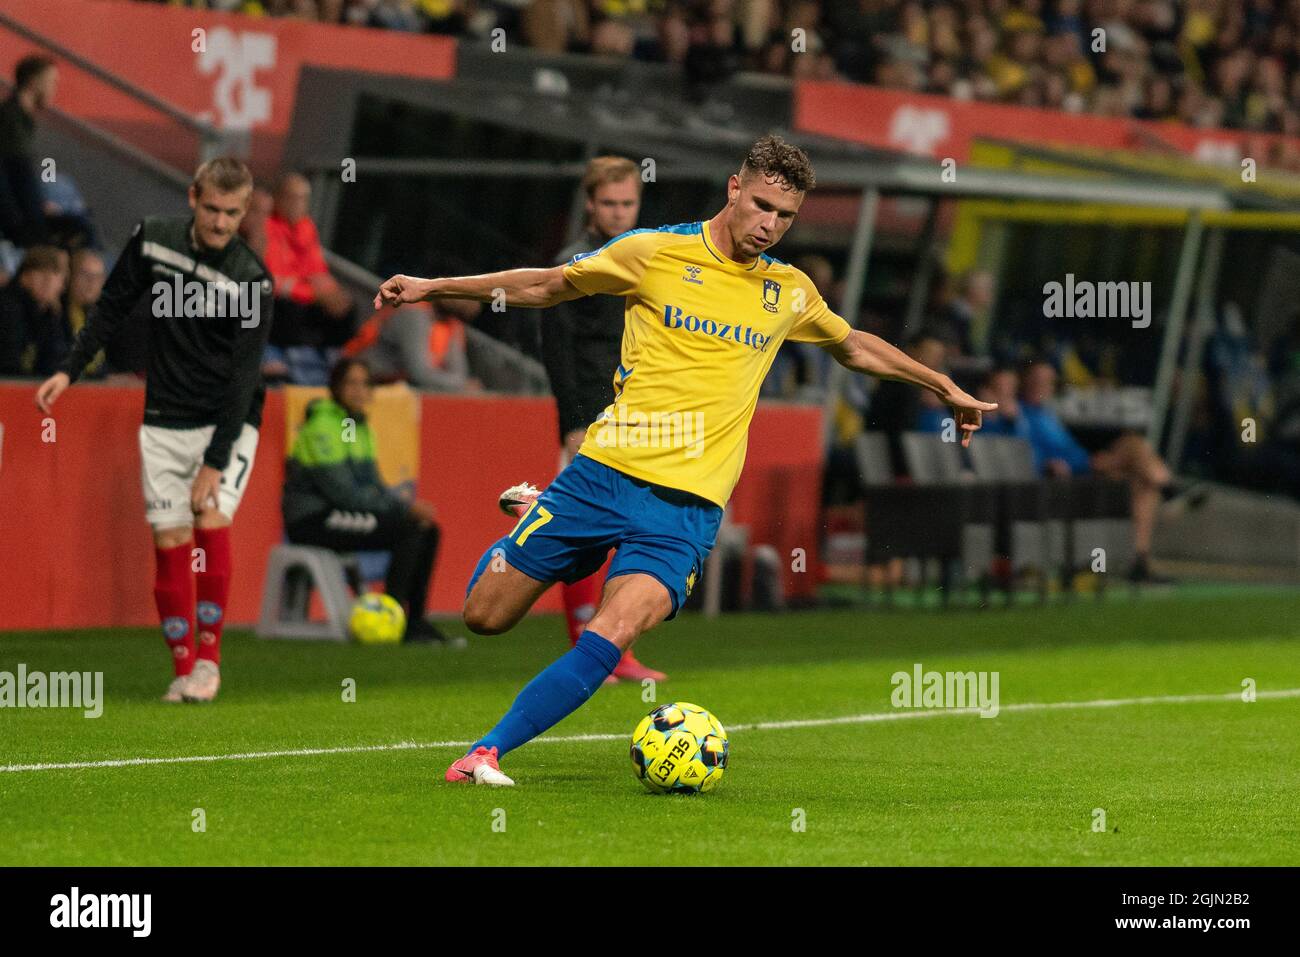 Brondby, Denmark. 10th Sep, 2021. Andreas Bruus (17) of Broendby IF seen during the 3F Superliga match between Broendby IF and Silkeborg IF at Brondby Stadion. (Photo Credit: Gonzales Photo/Alamy Live News Stock Photo